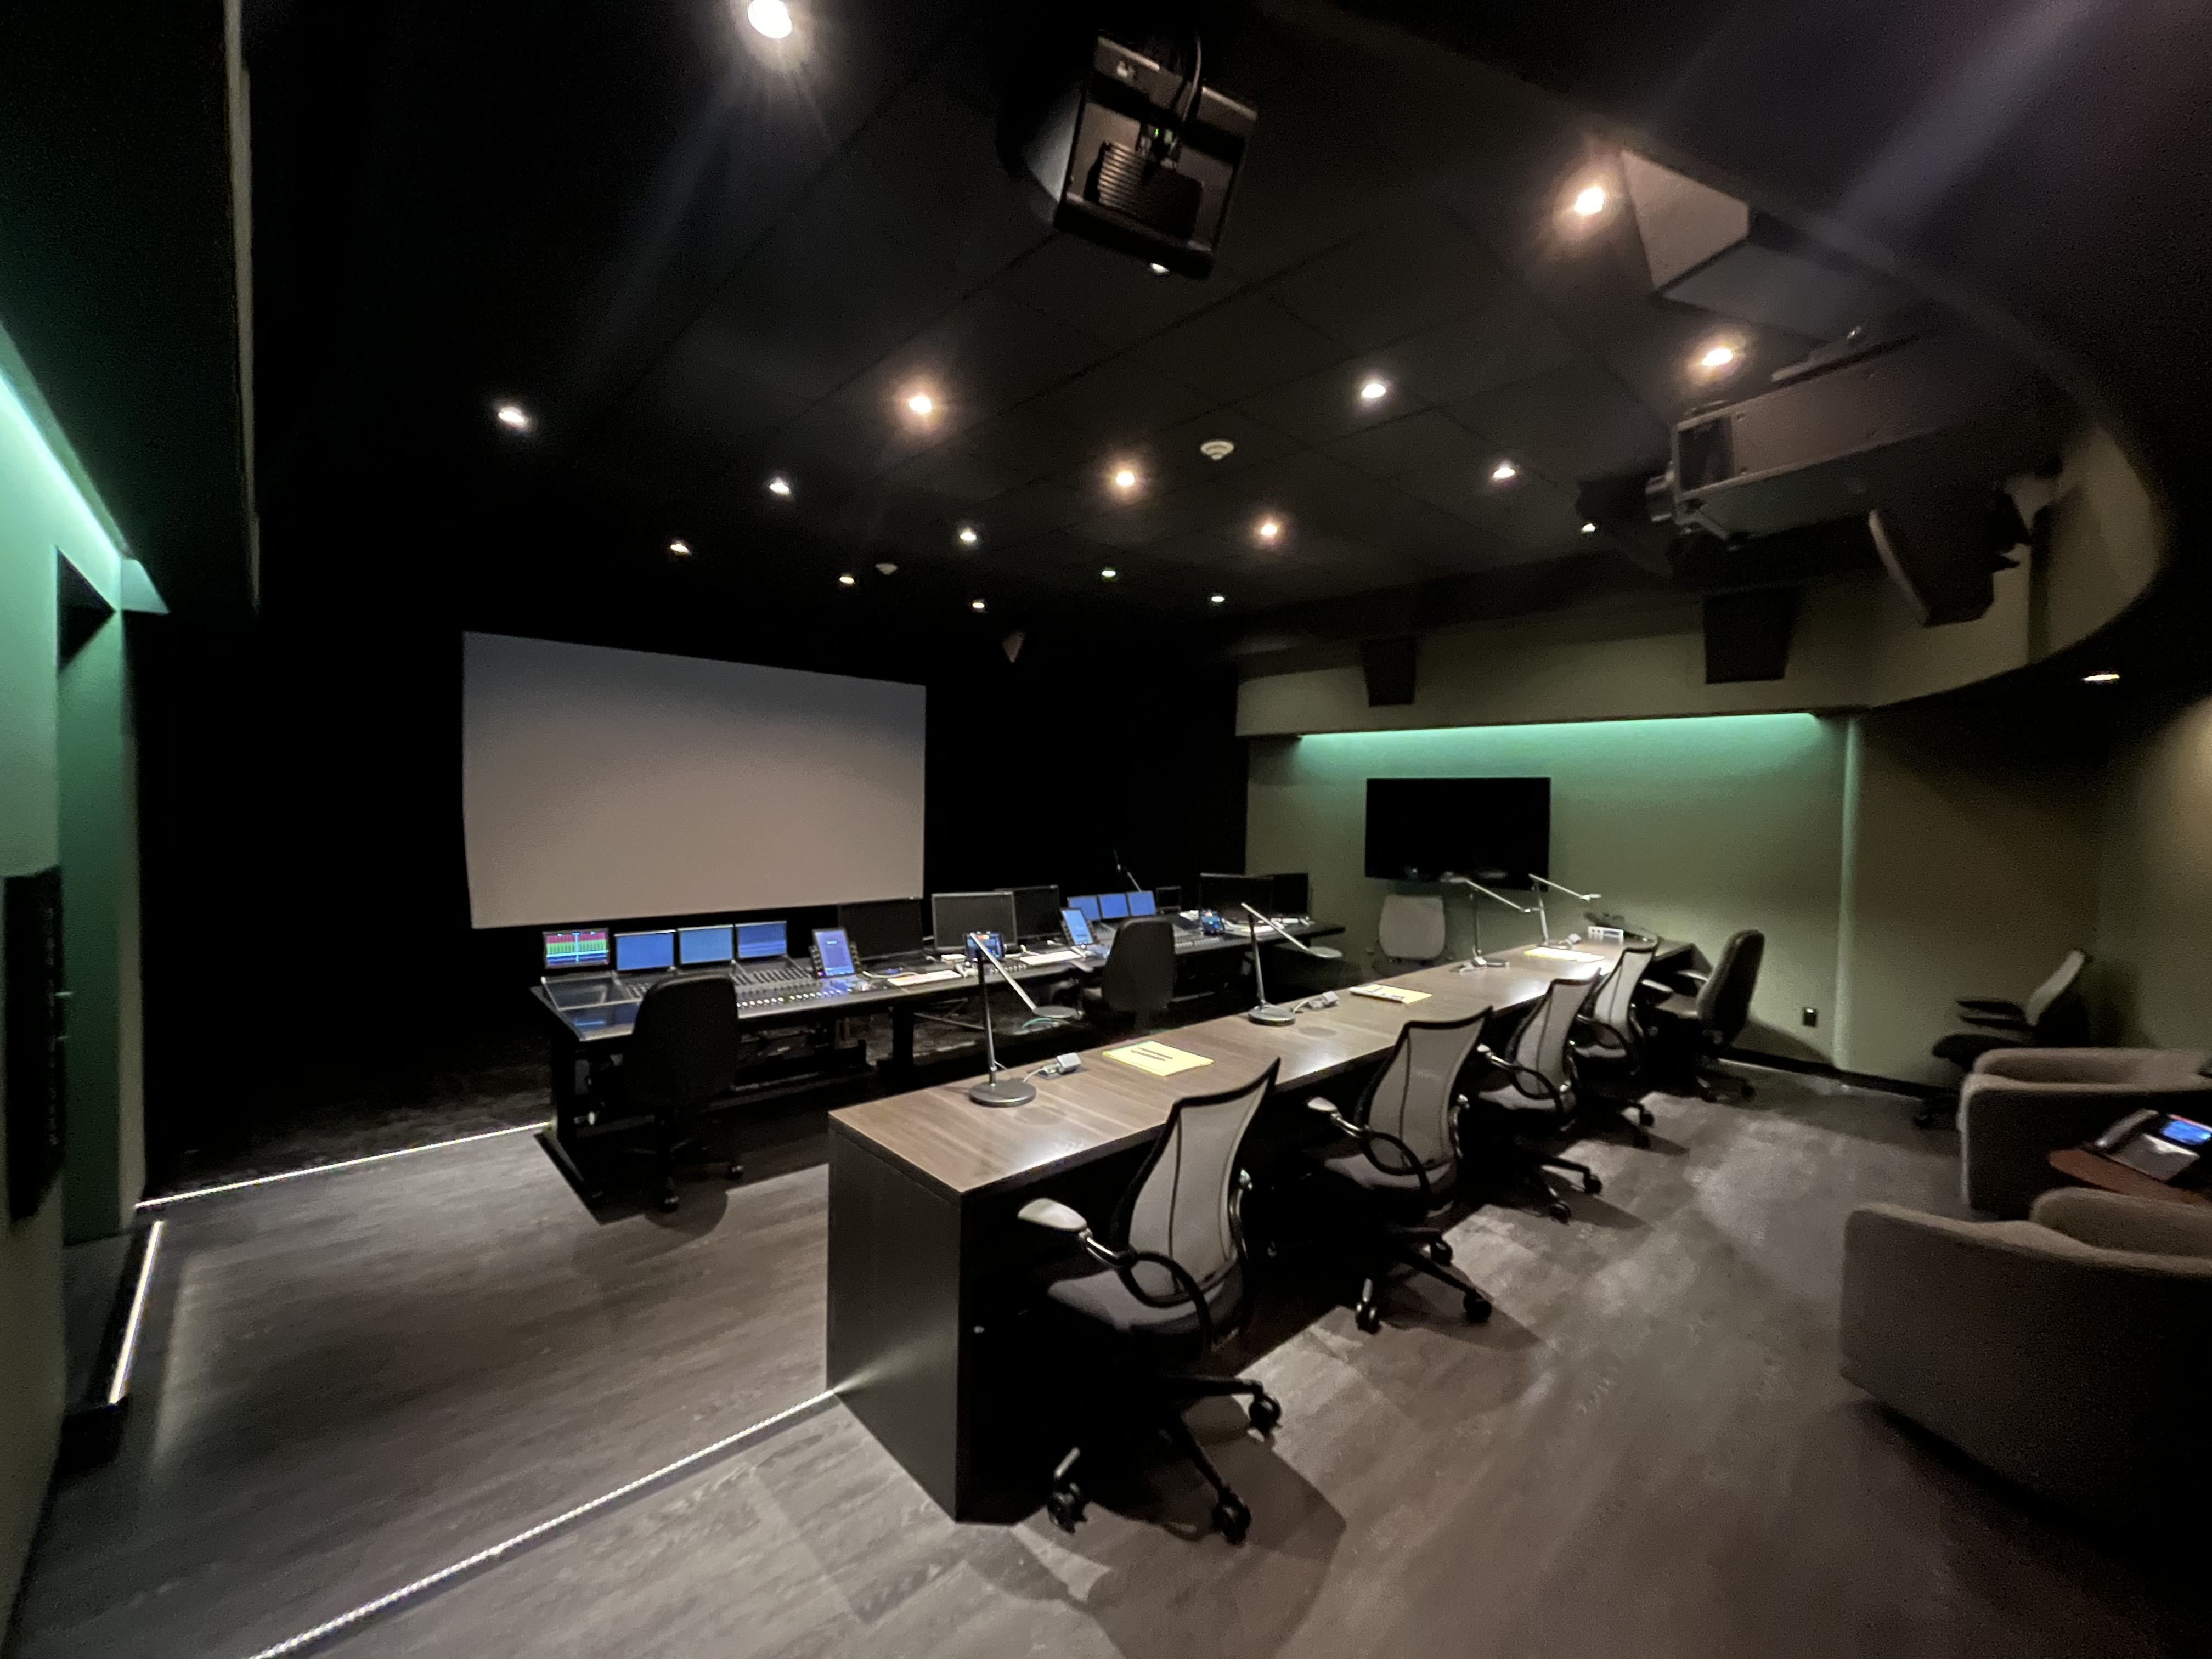 Sony Pictures Entertainment Completes Upgrades to All 14 Mix Stages